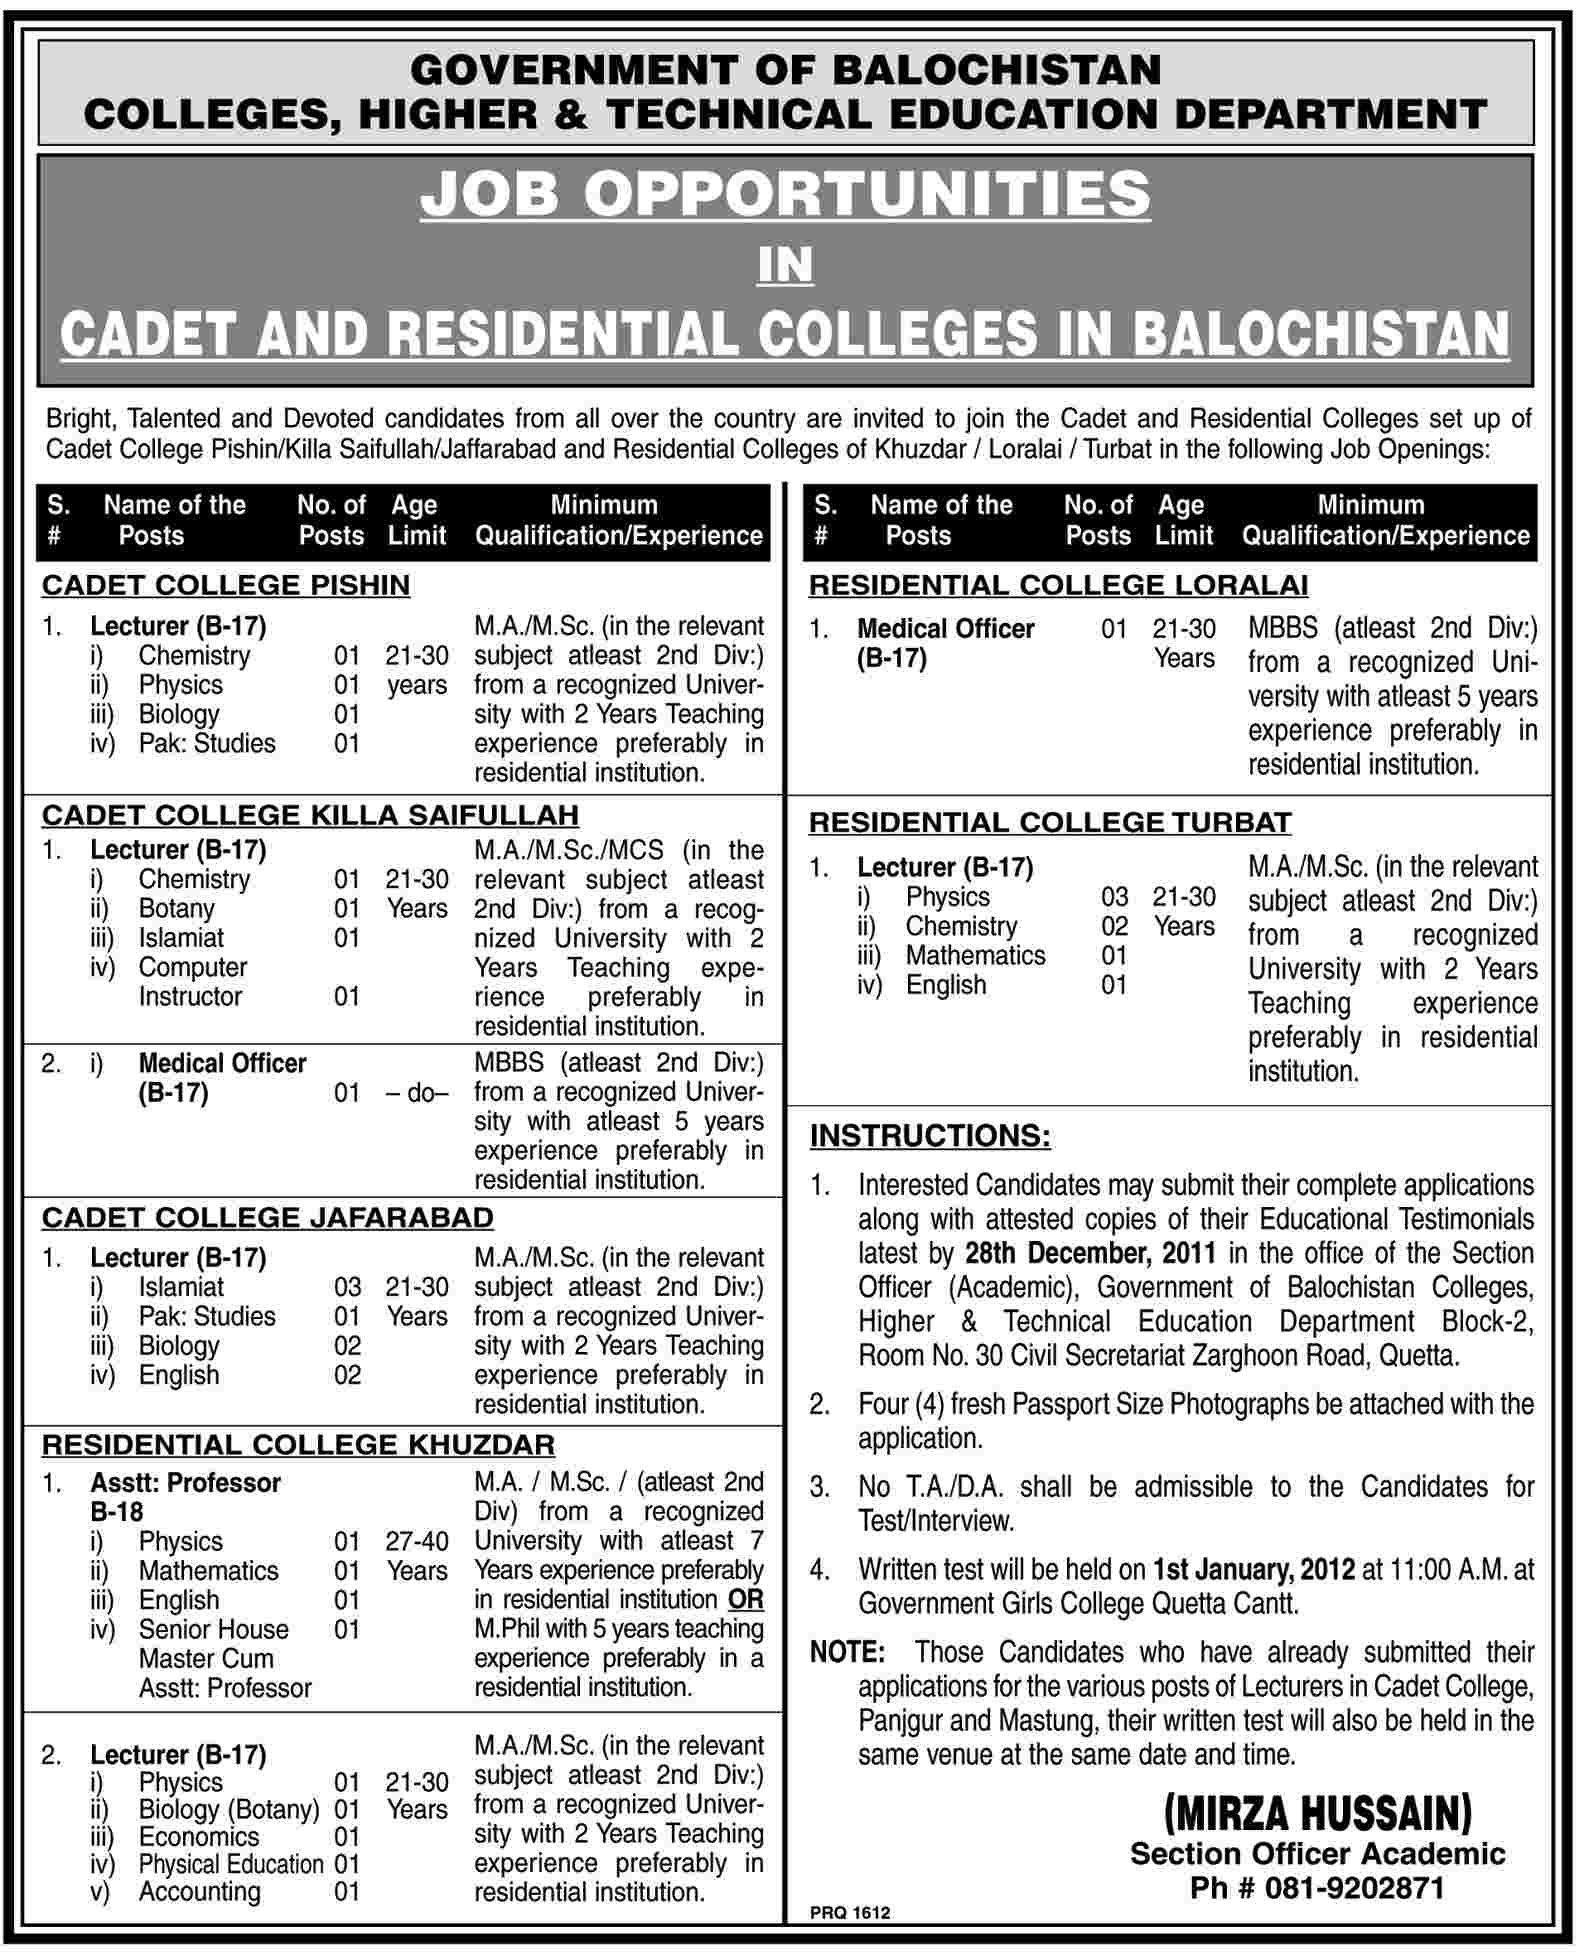 Colleges, Higher & Technical Education Department, Government of Balochistan Jobs Opportunities